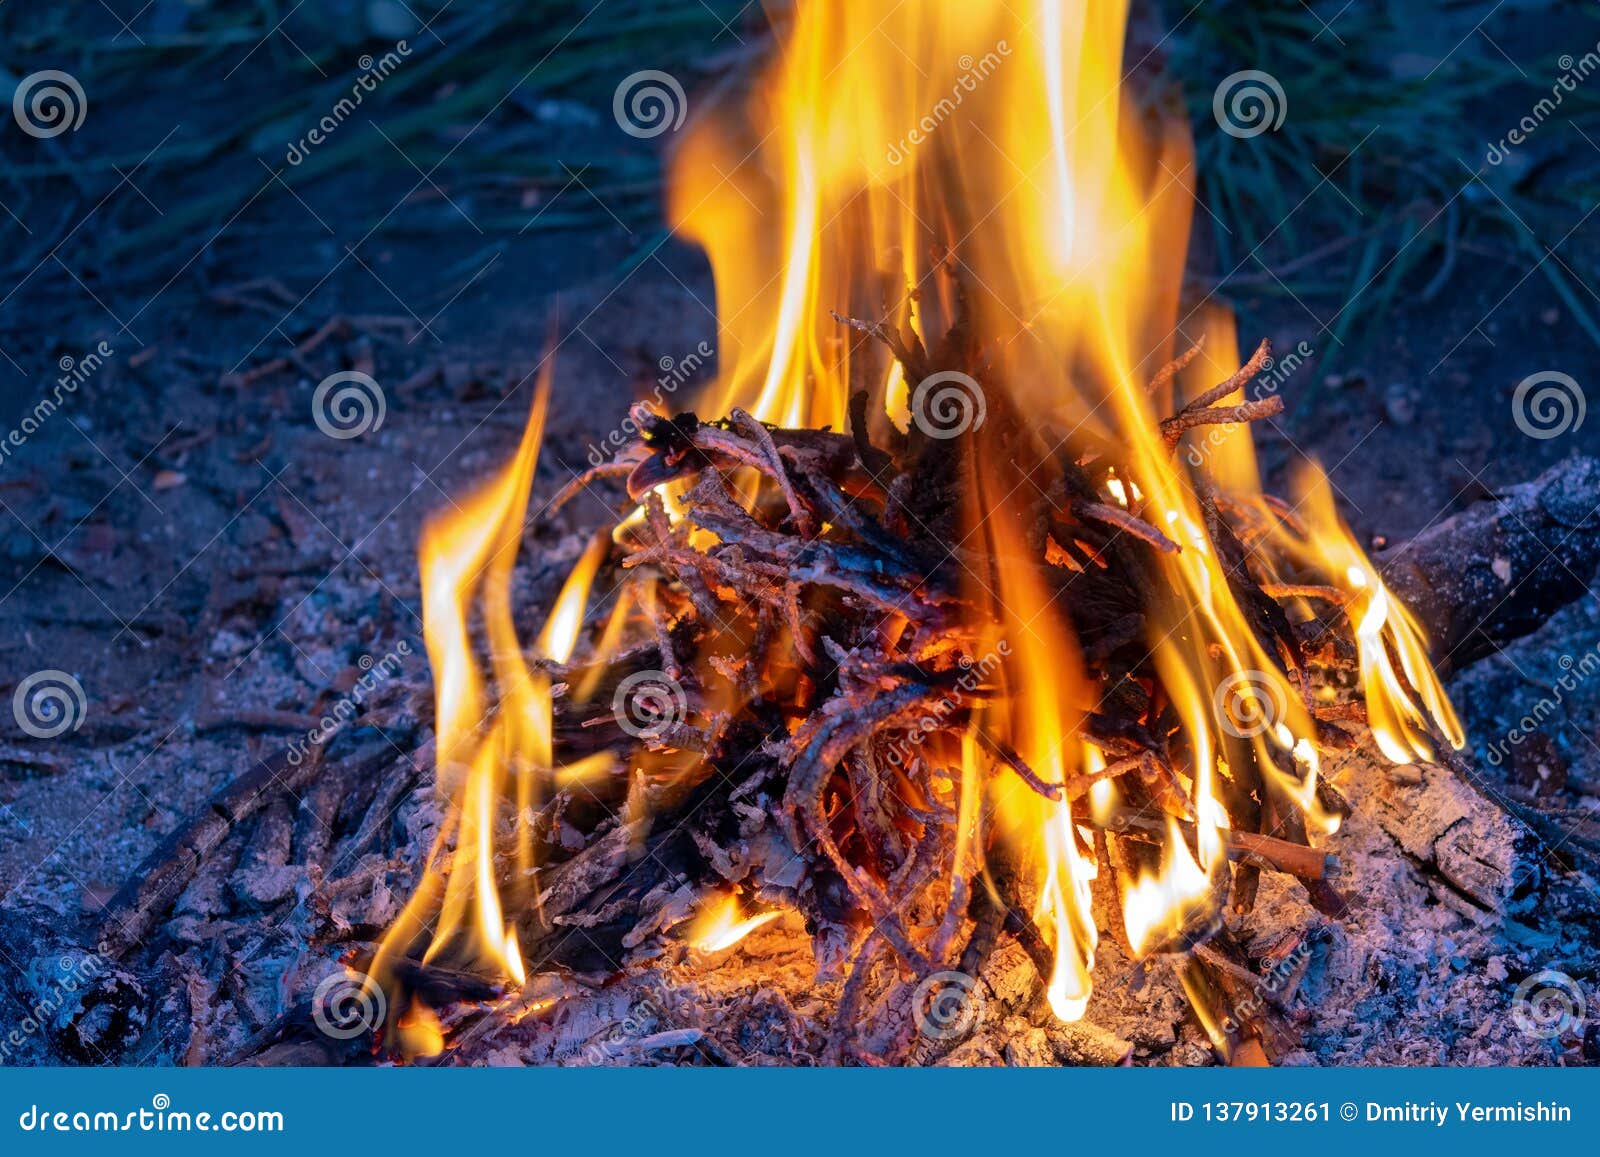 Campfire. Fire for cooking stock image. Image of campsite - 137913261